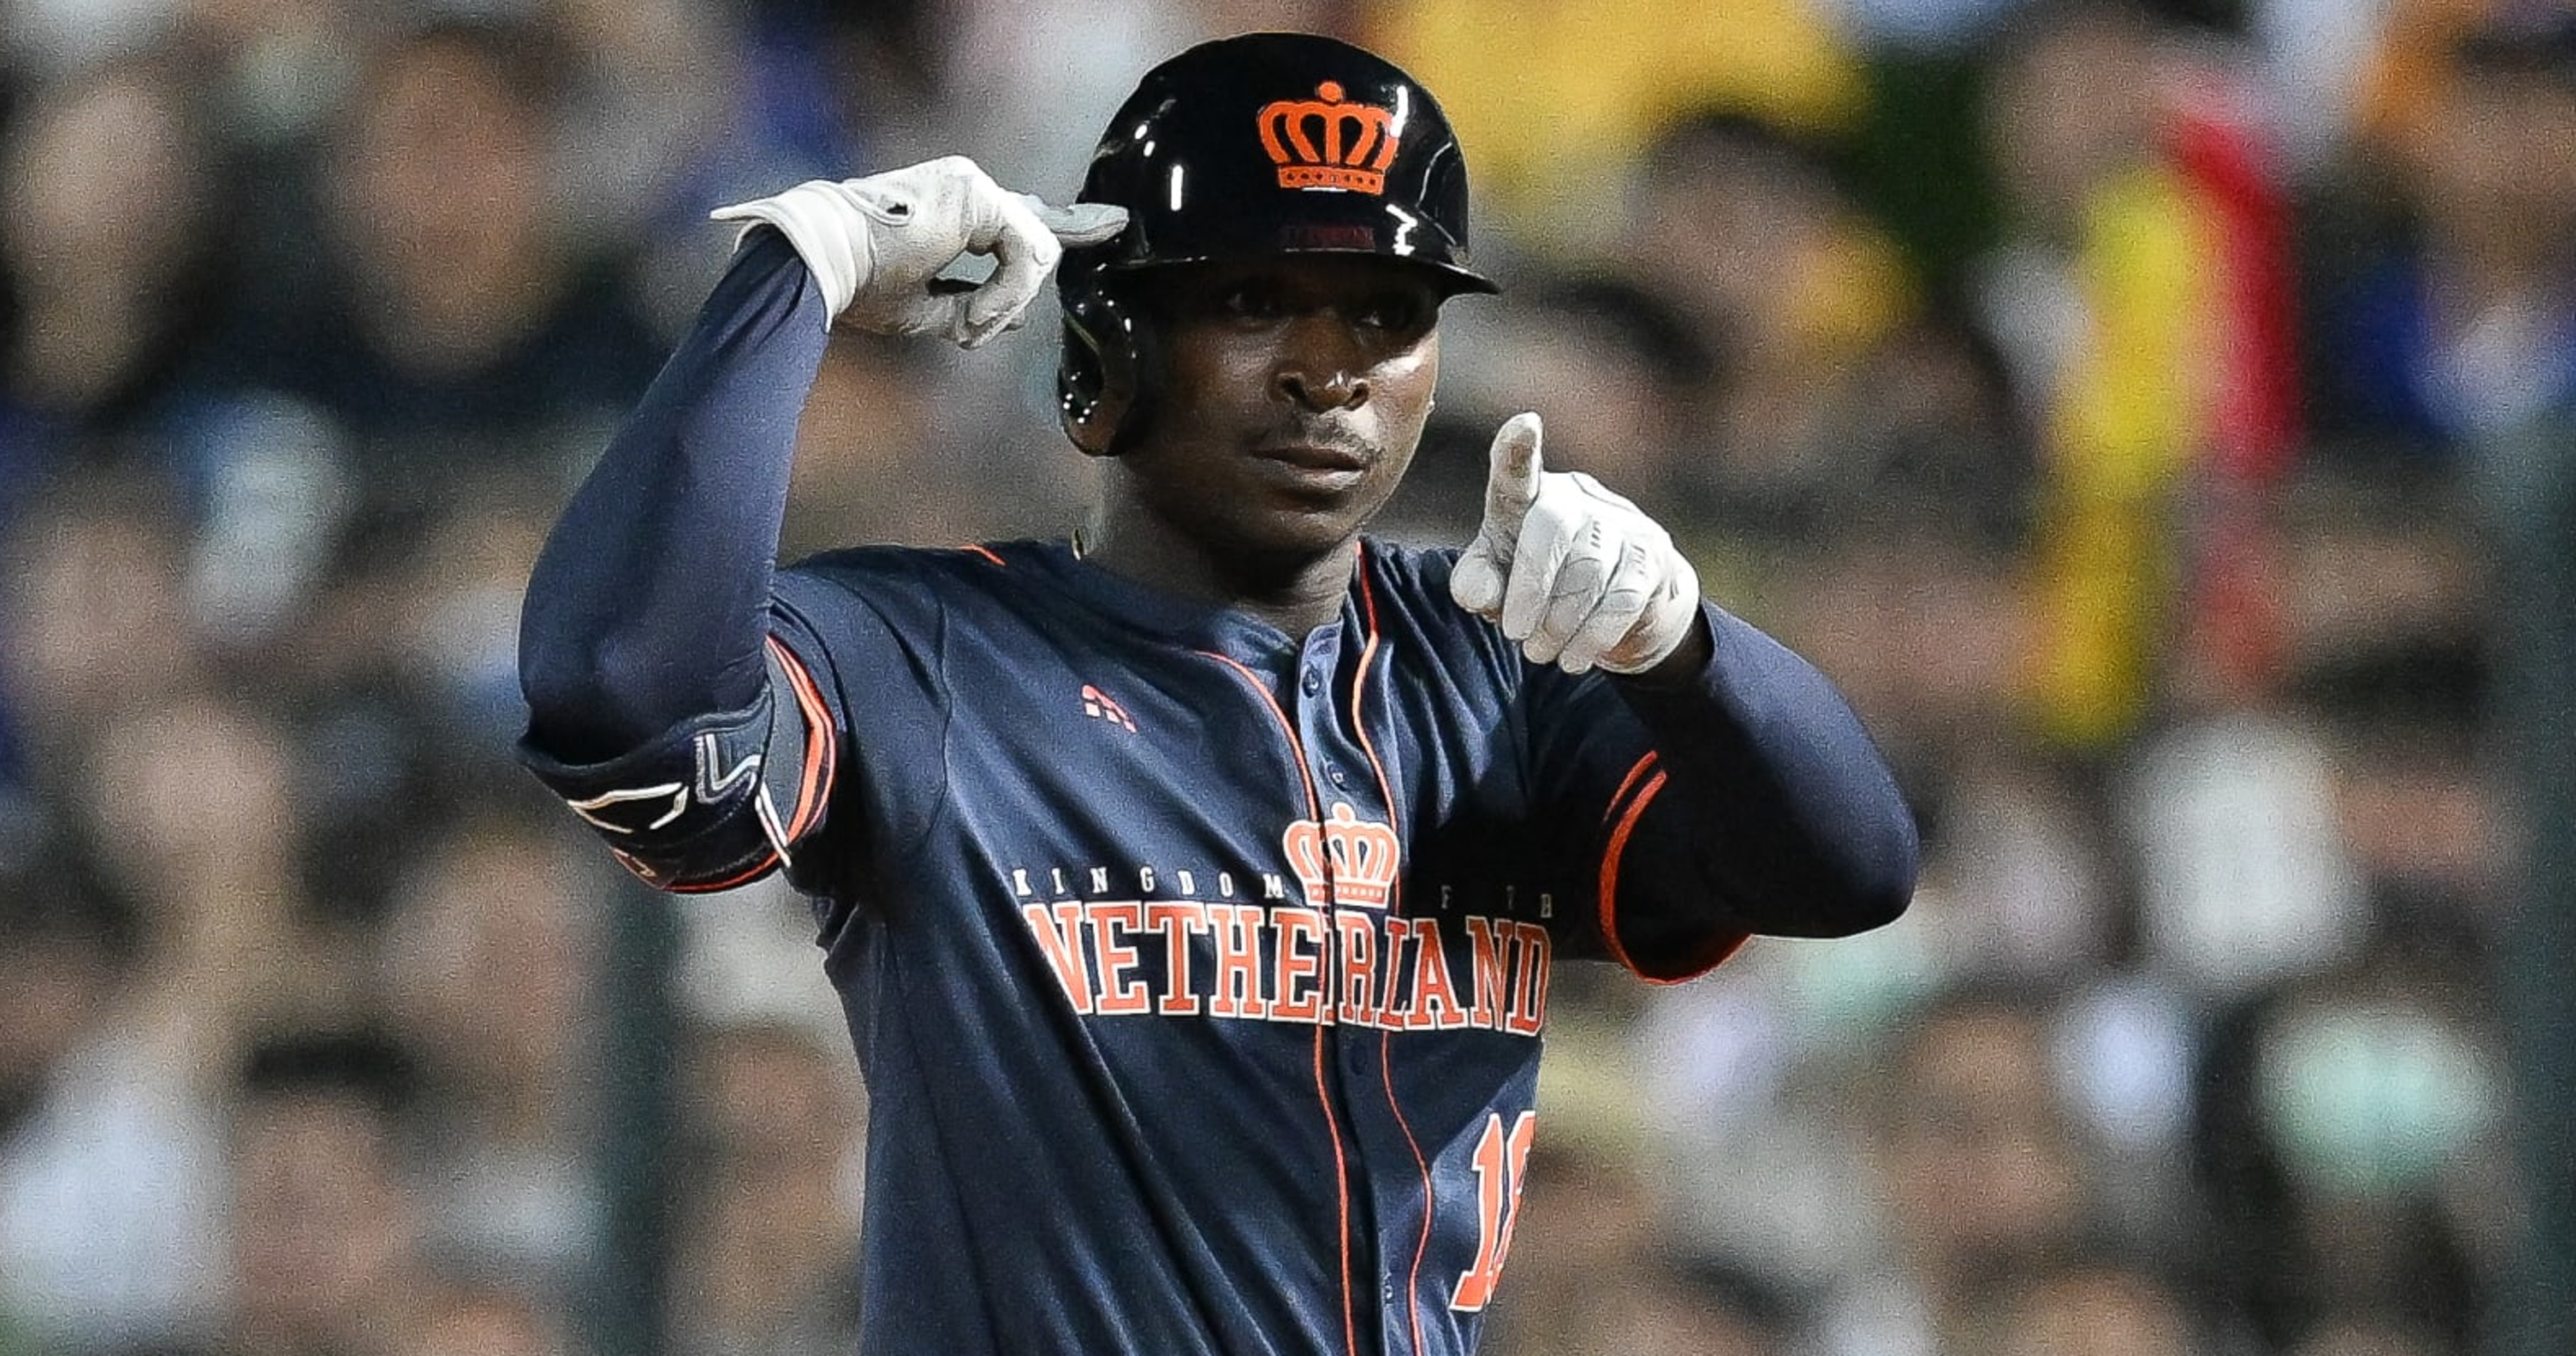 World Baseball Classic: Yankees' Gregorius to play for Netherlands